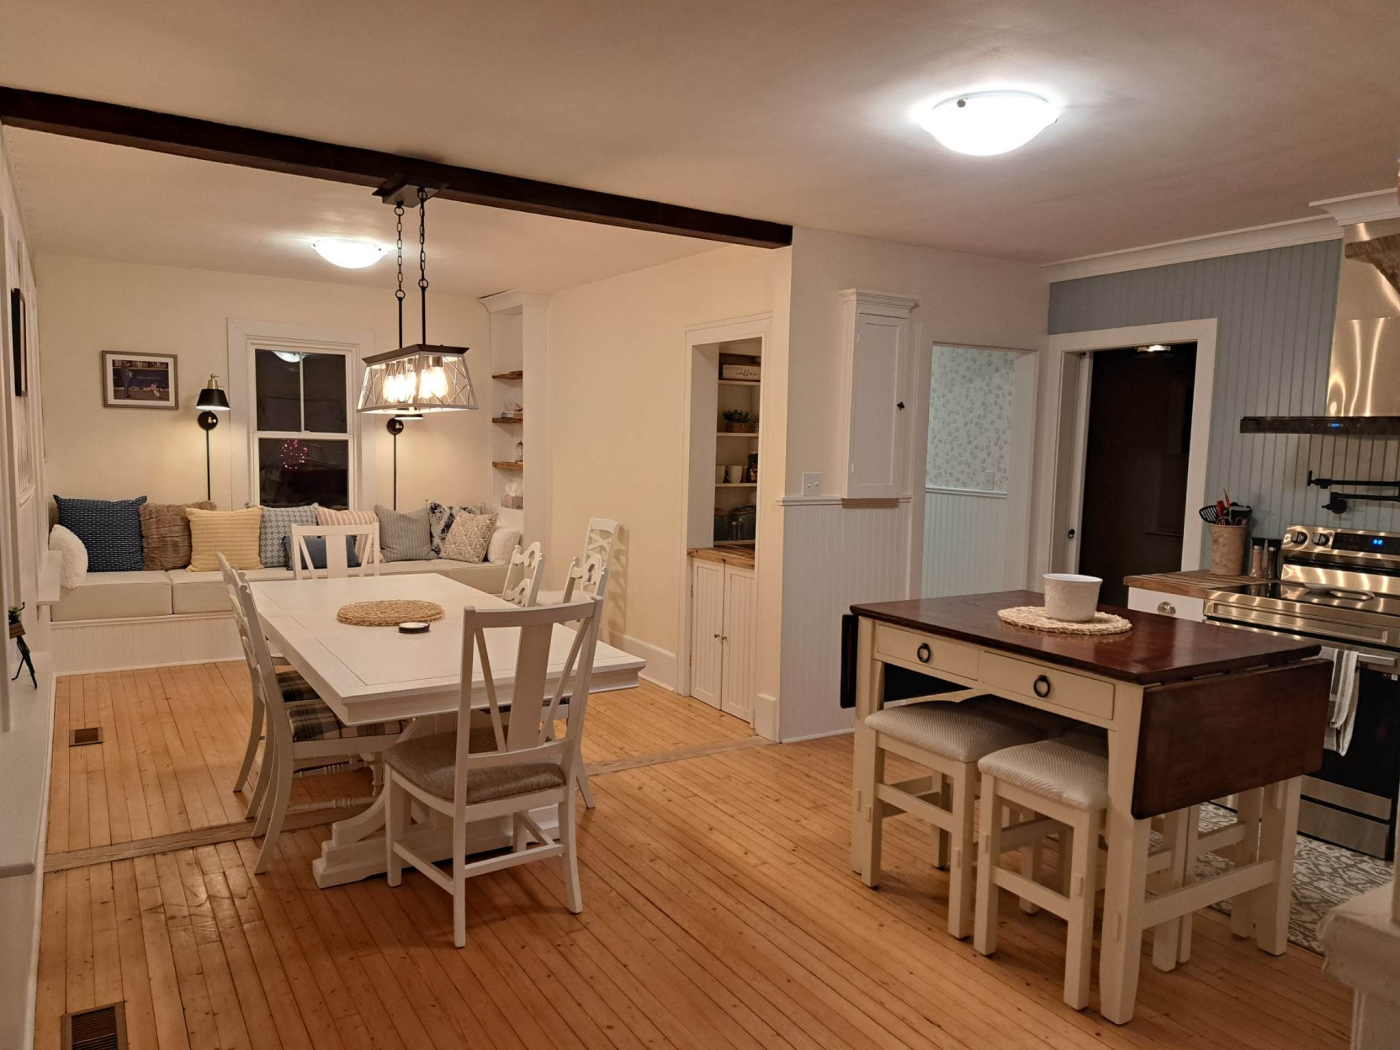 Image of kitchen and dining area with white table and chairs and island also has seating